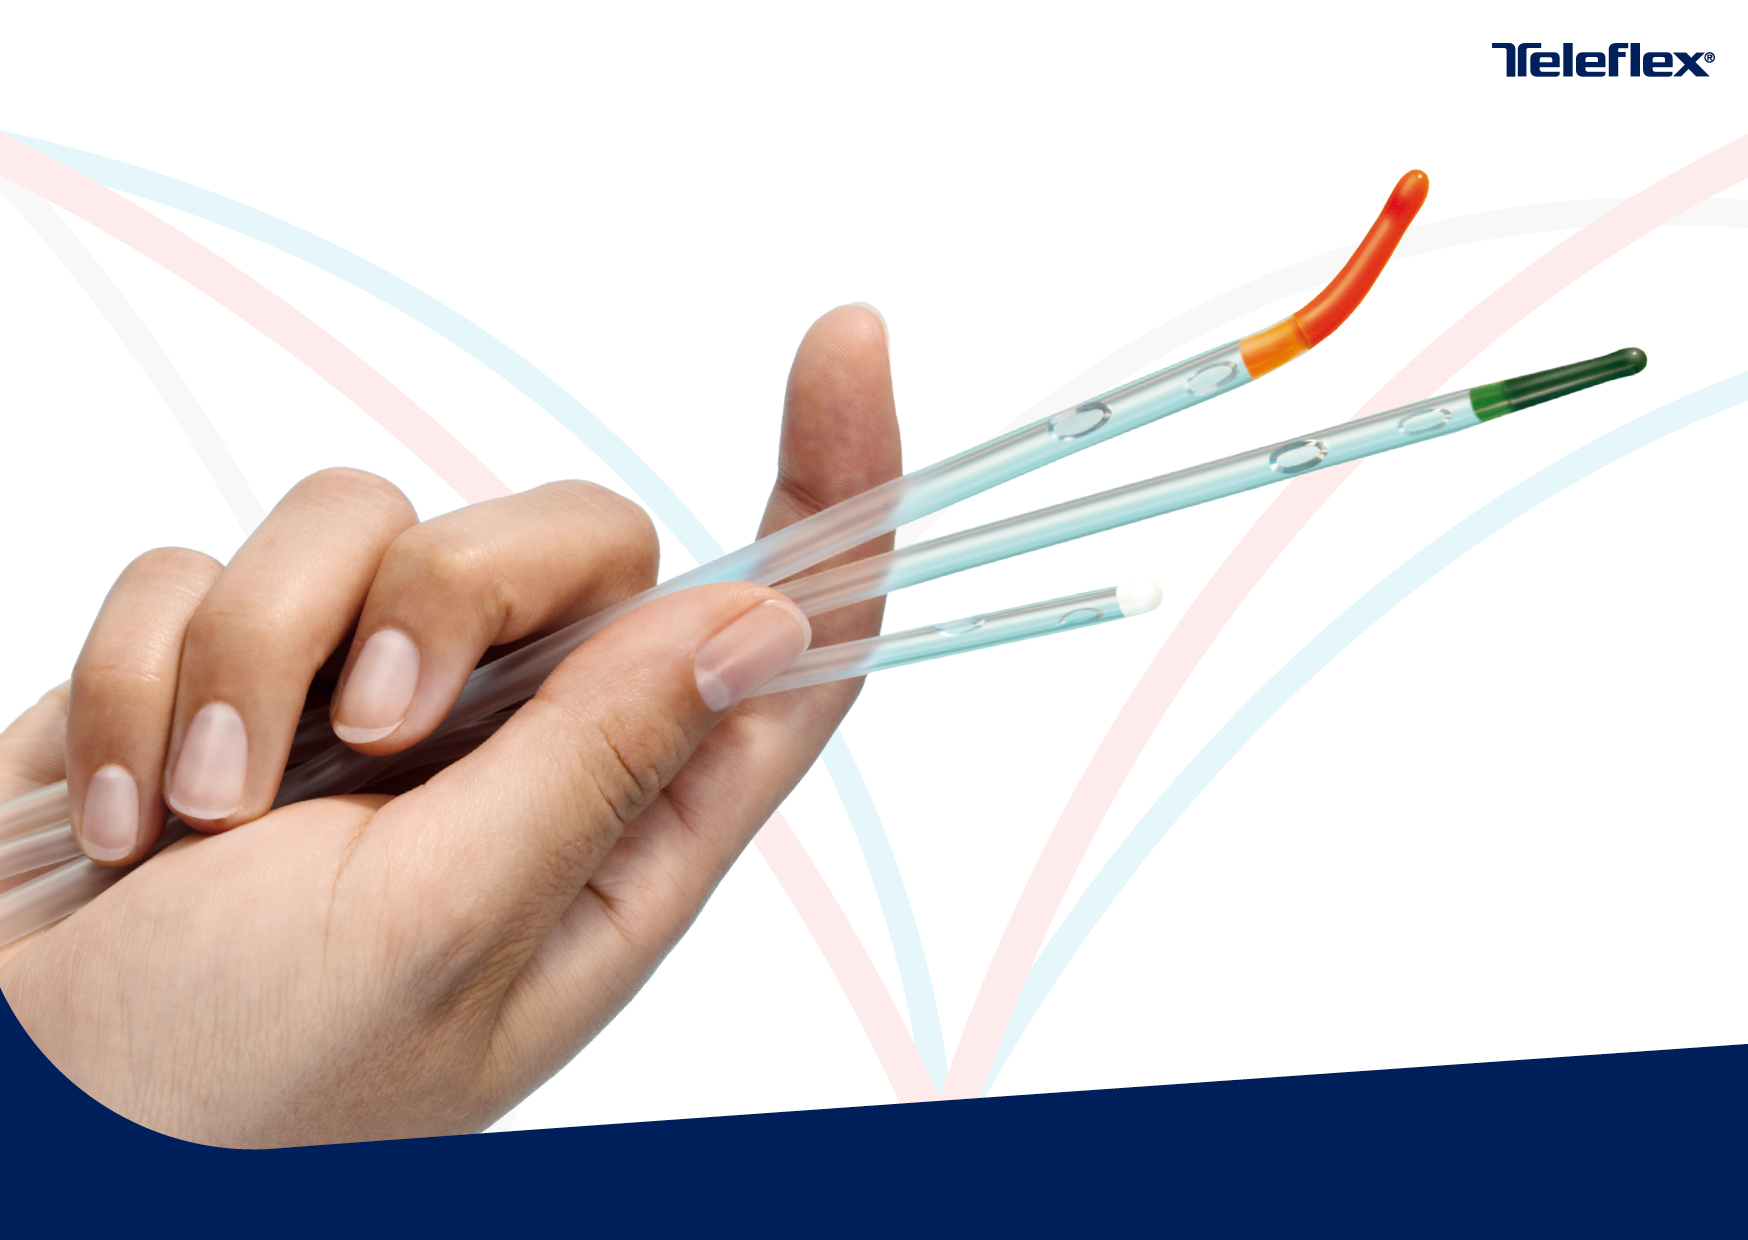 Find the right single-use catheter with Teleflex Urology Care